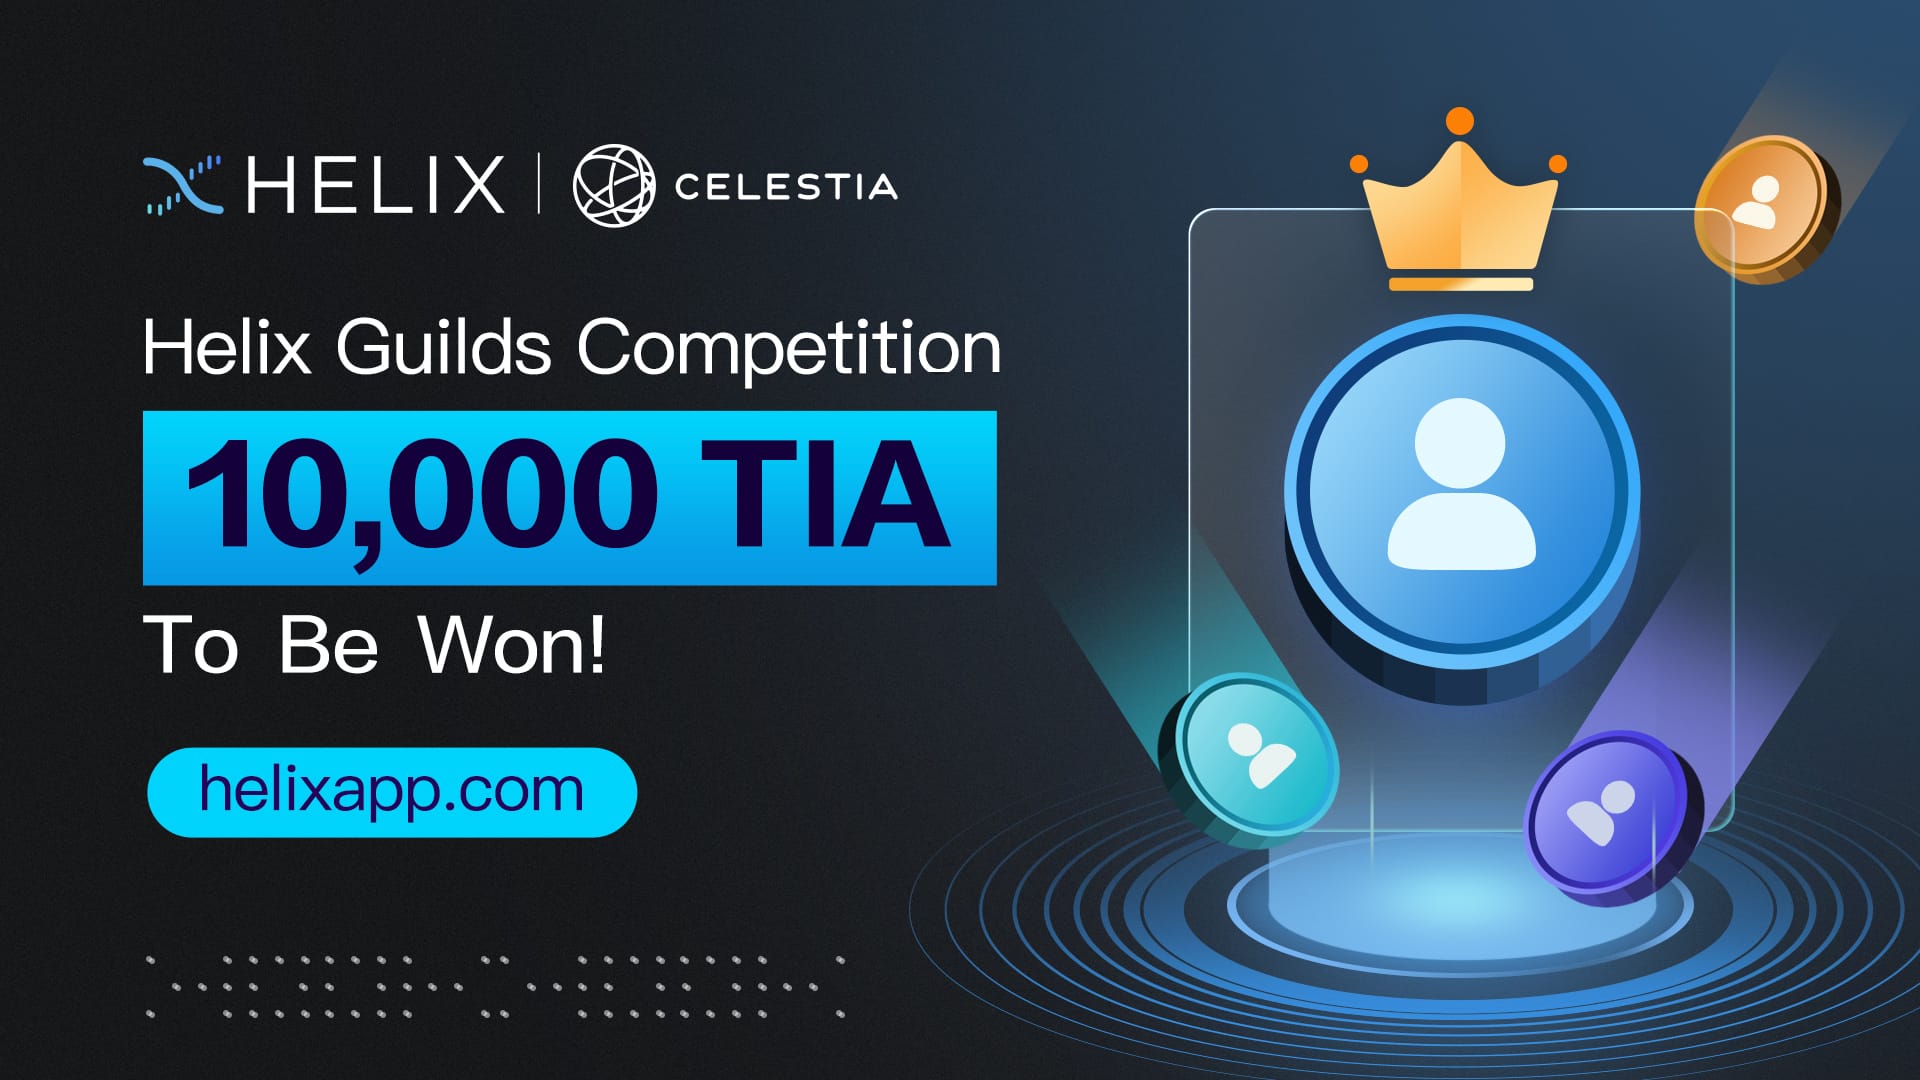 [CLOSED] Share 10,000 TIA Rewards in Helix Guilds Competition